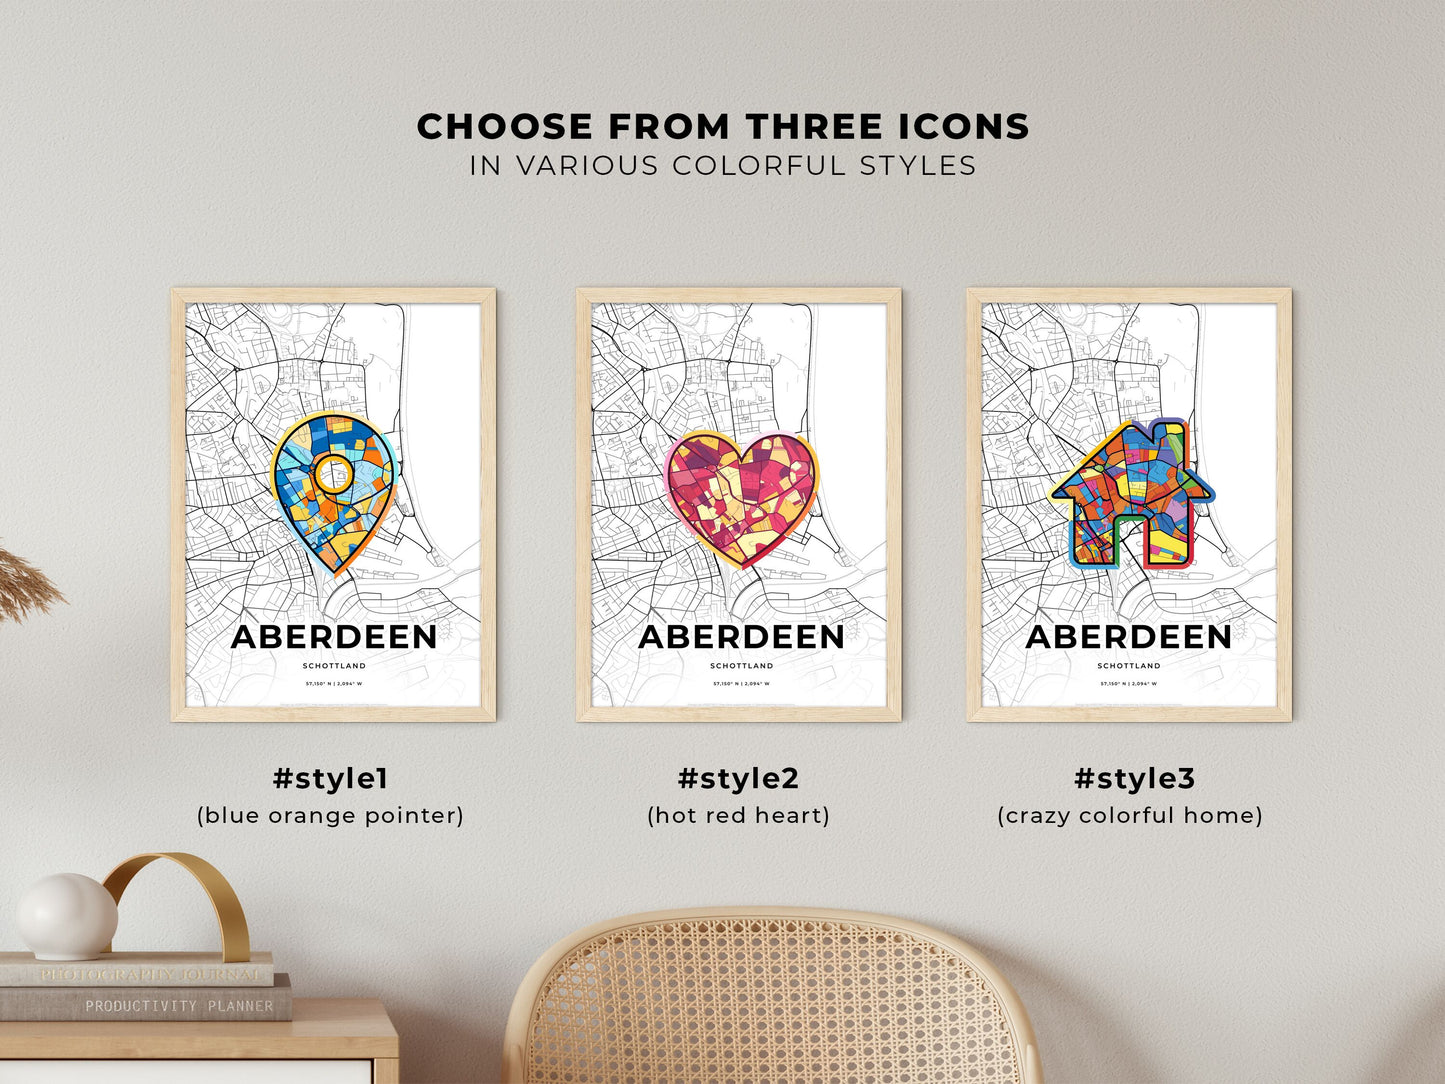 ABERDEEN SCOTLAND minimal art map with a colorful icon. Where it all began, Couple map gift.